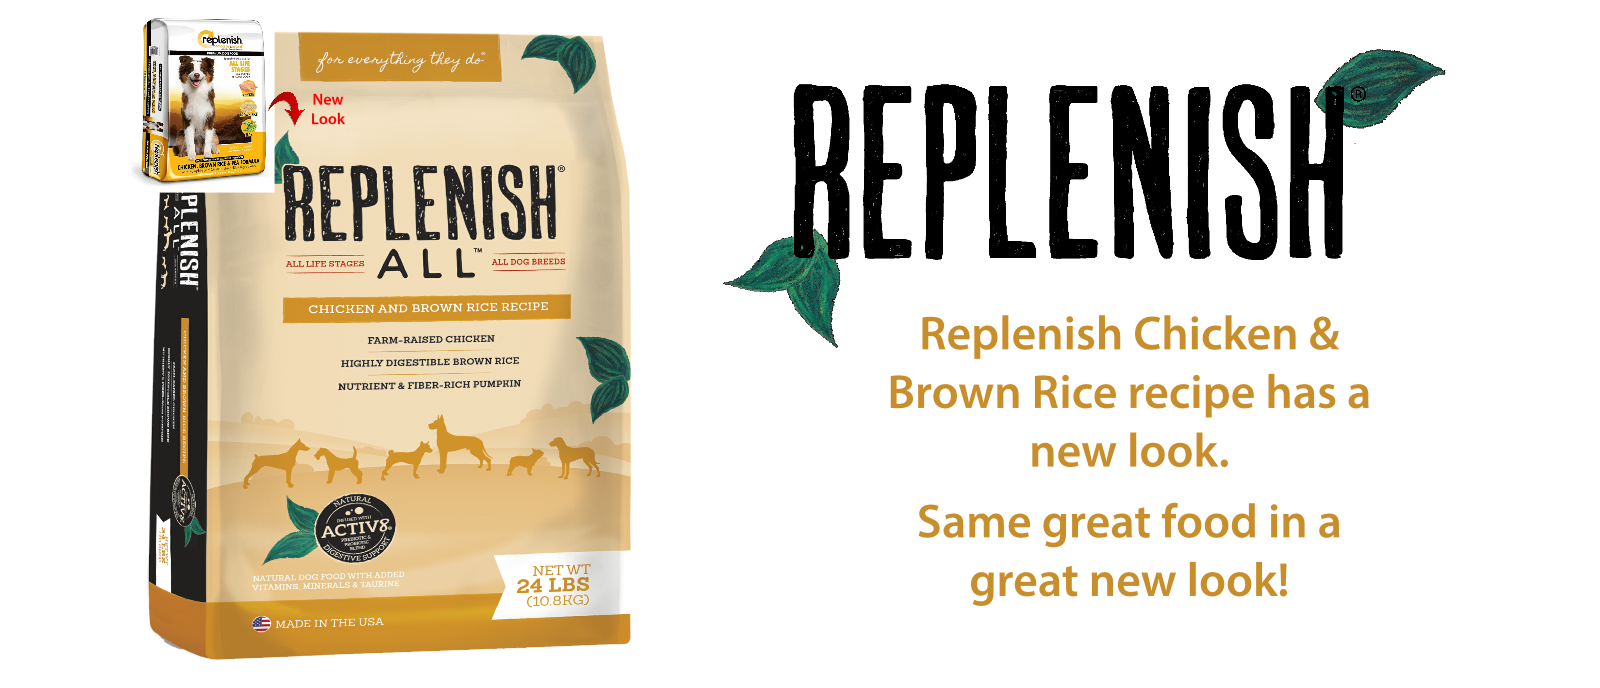 Replenish Classic Chicken Has A New Look